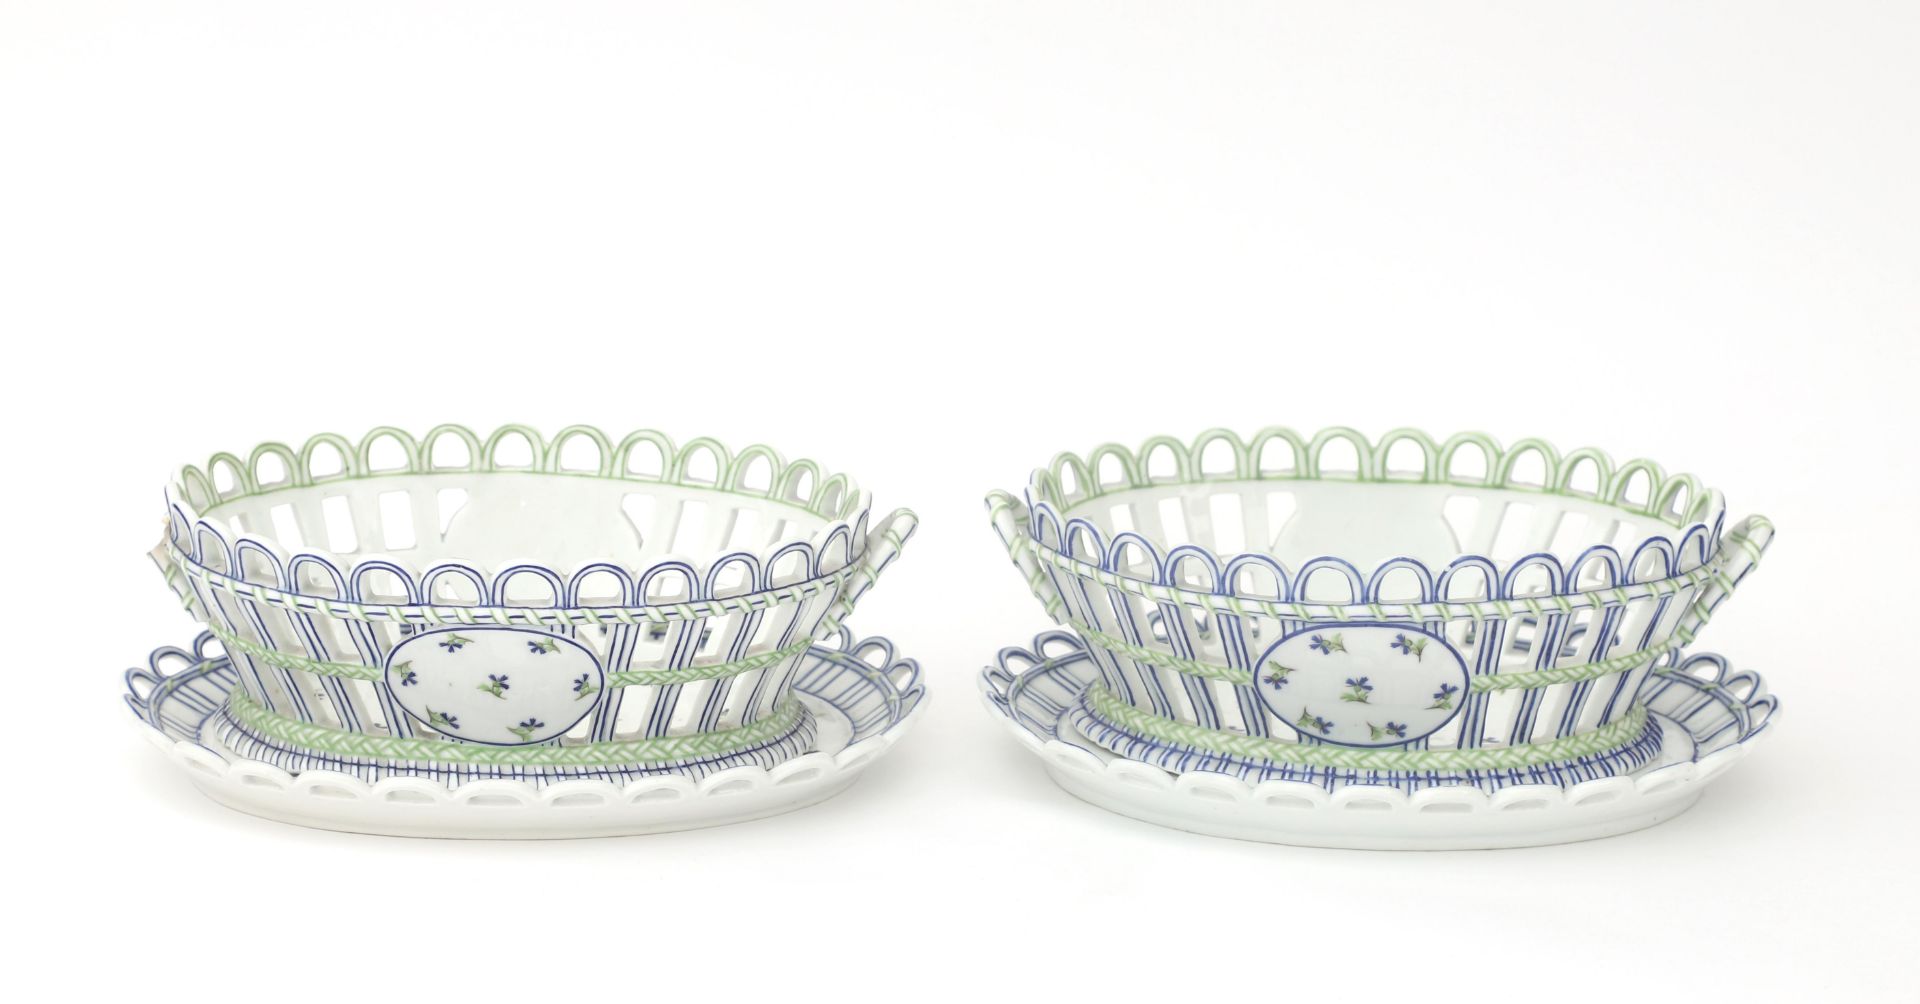 Two porcelain oval baskets (nut baskets) with stand, Niderviller (Germany: Niederweiler), Lorraine,